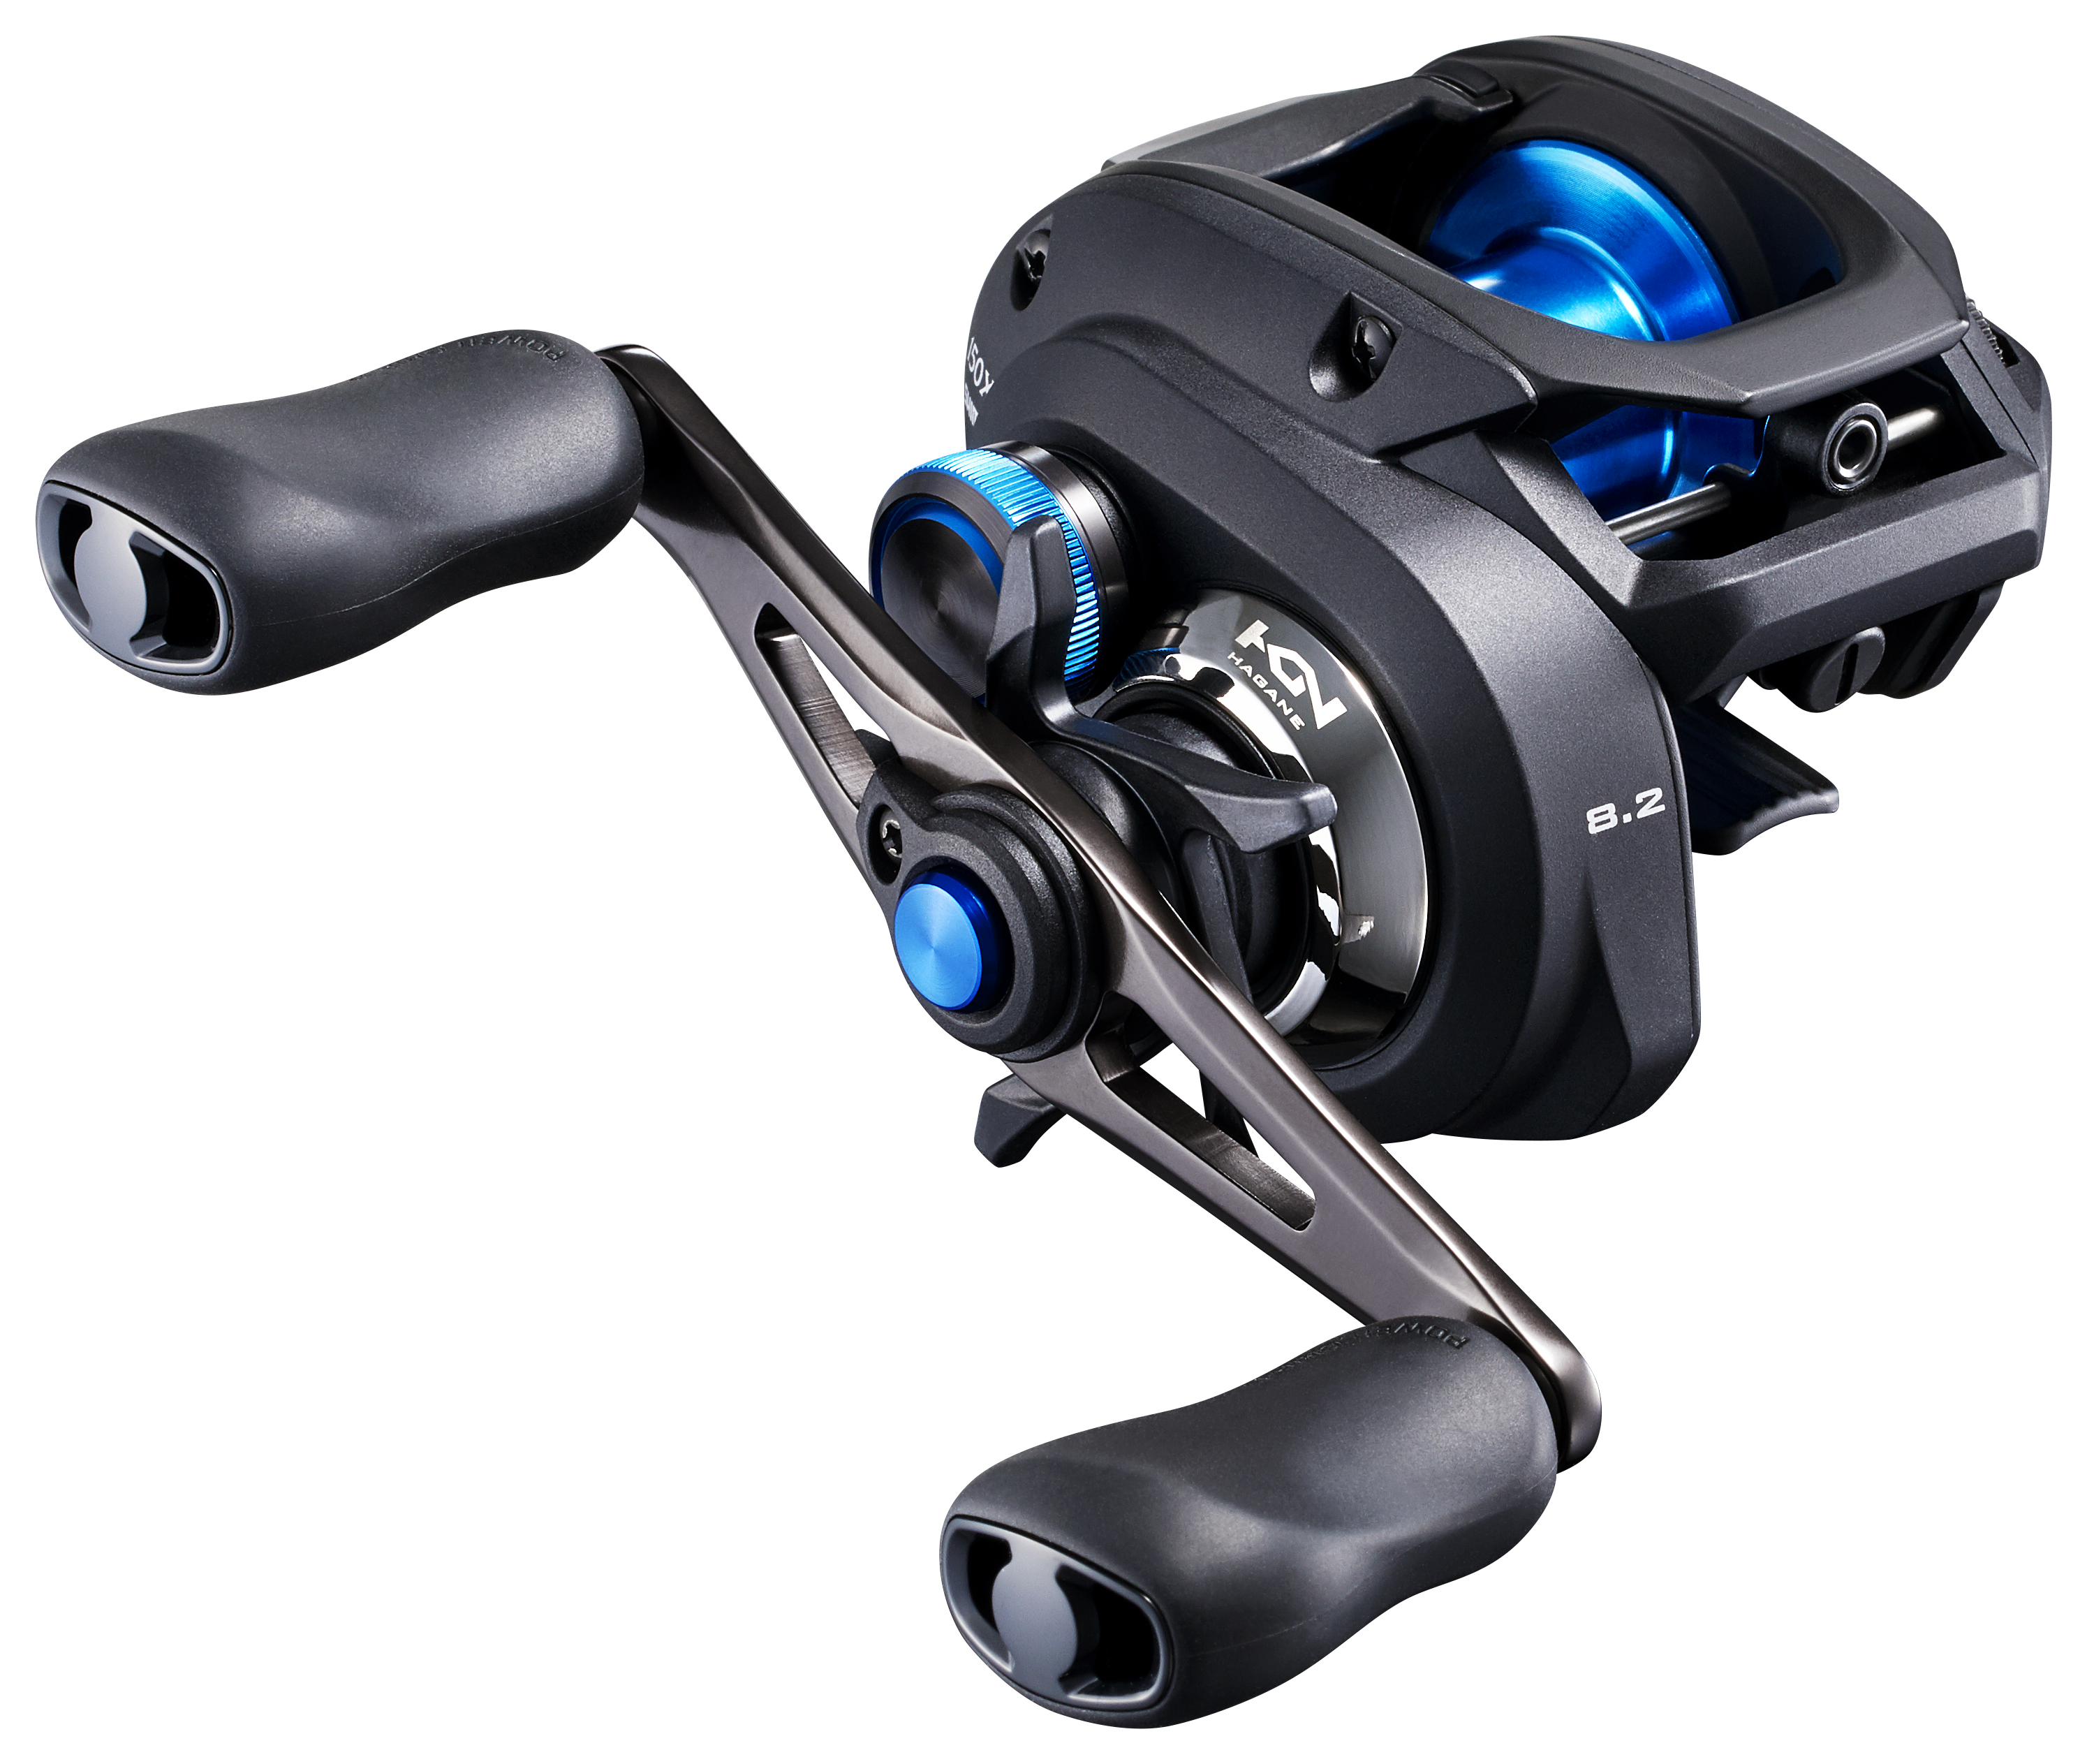 ICAST 2019: All the New Gear from Shimano, Jackall, G.Loomis